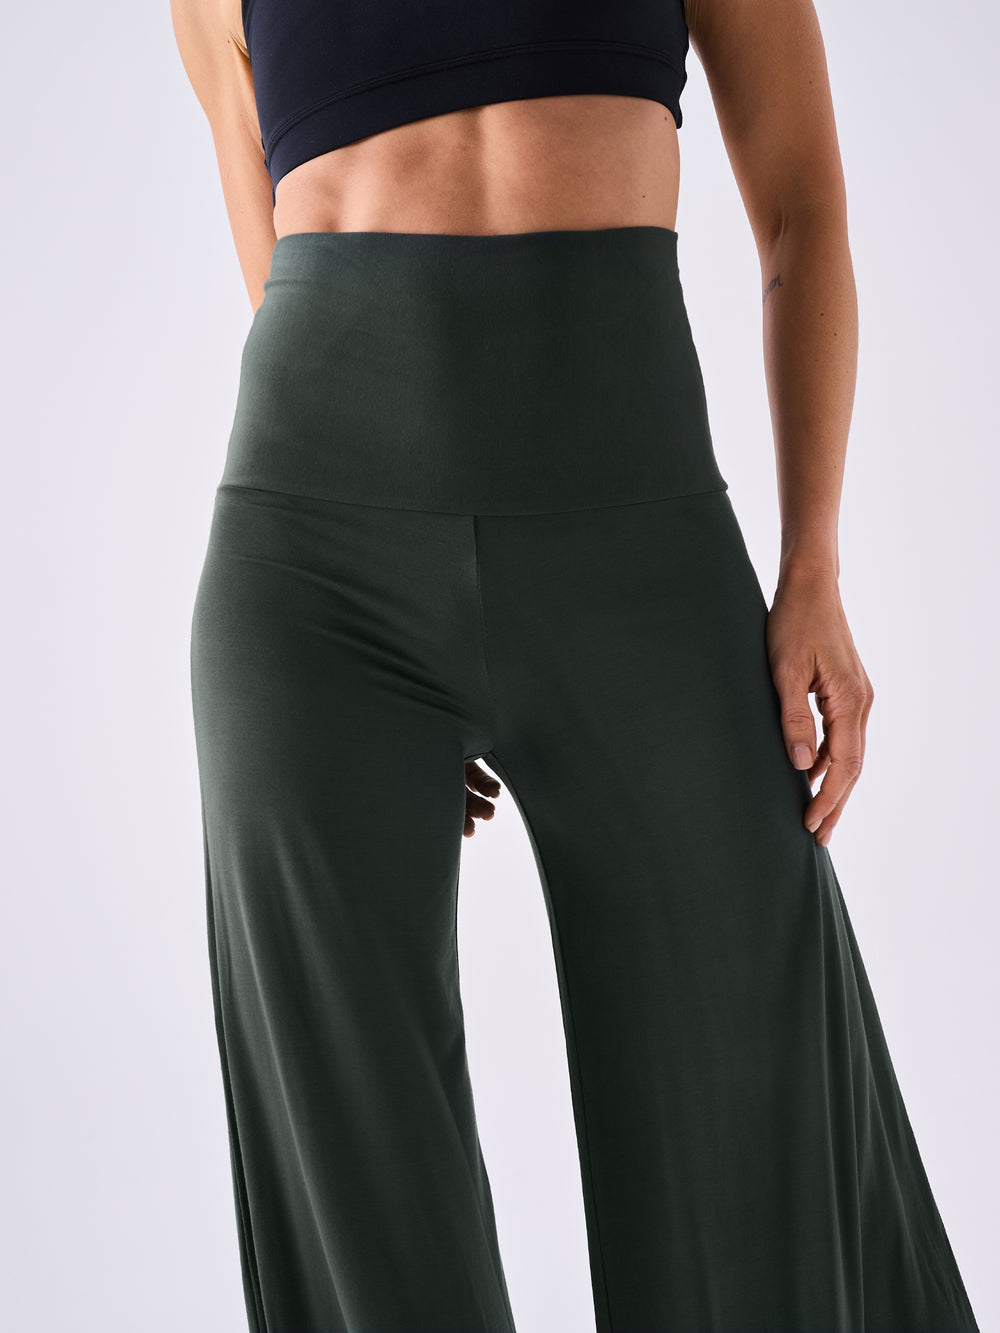 Modal Tulip Flare Pant - Forest